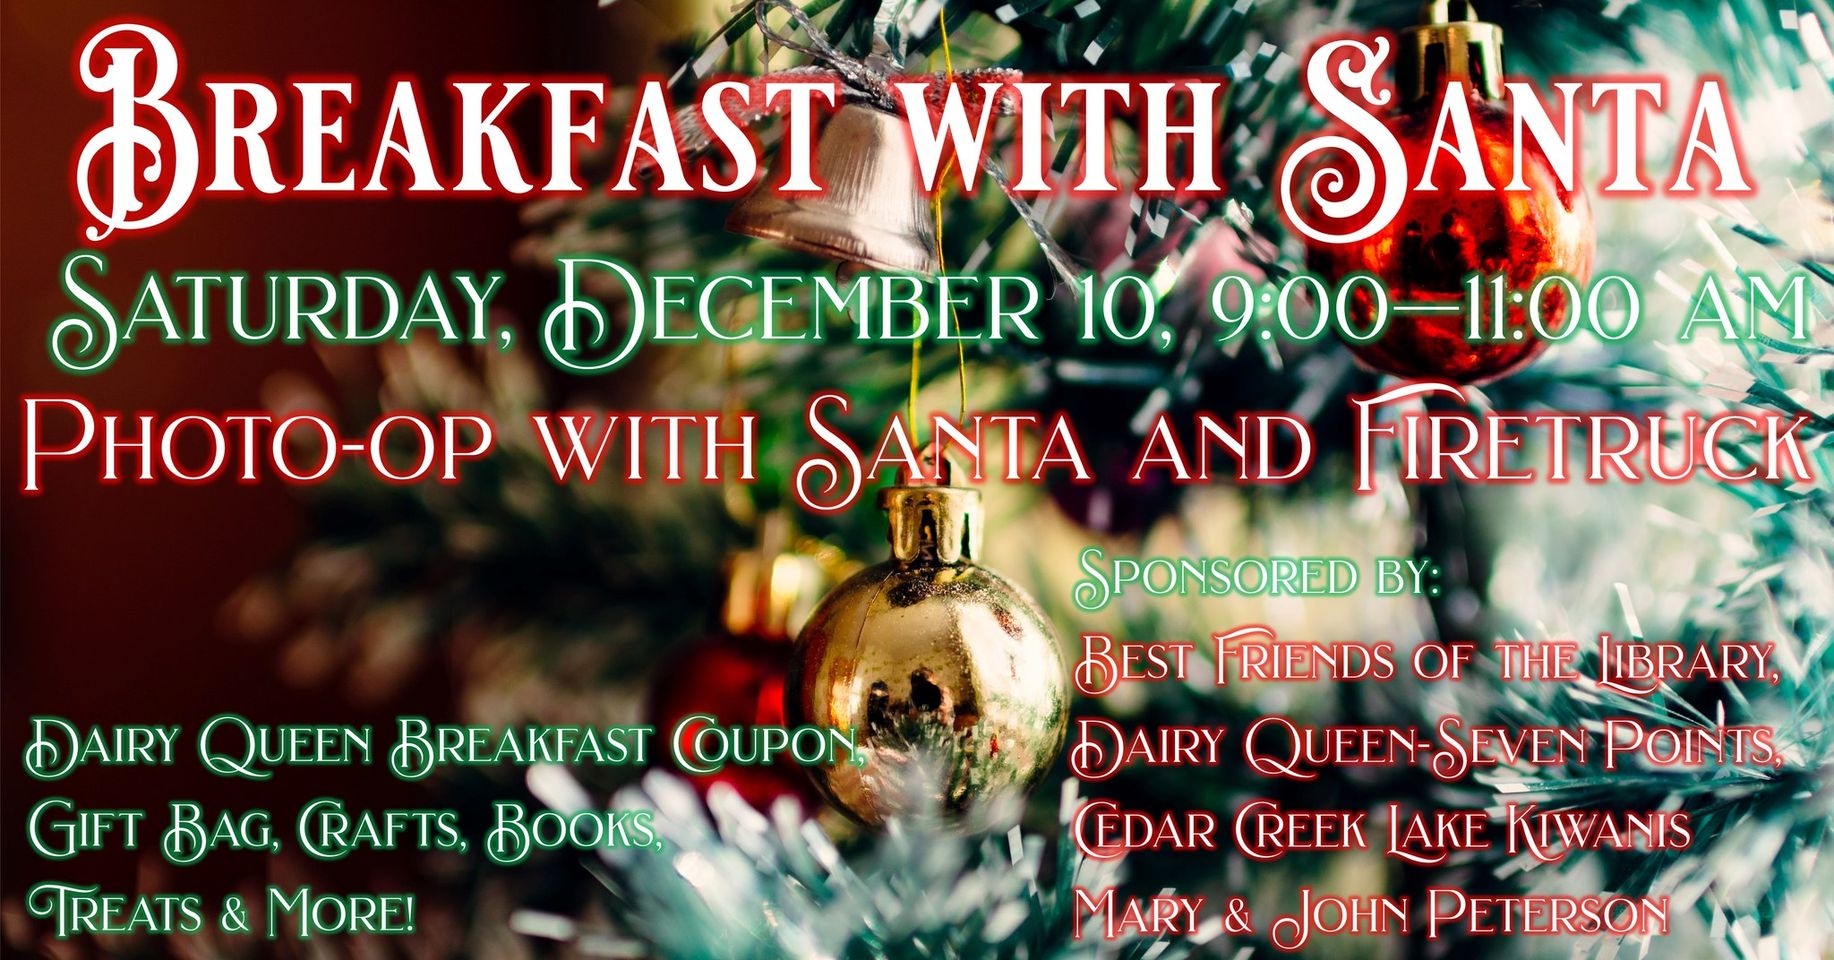 Breakfast with Santa at the Library at Cedar Creek Lake 1 breakfast with santa ccll CedarCreekLake.Online